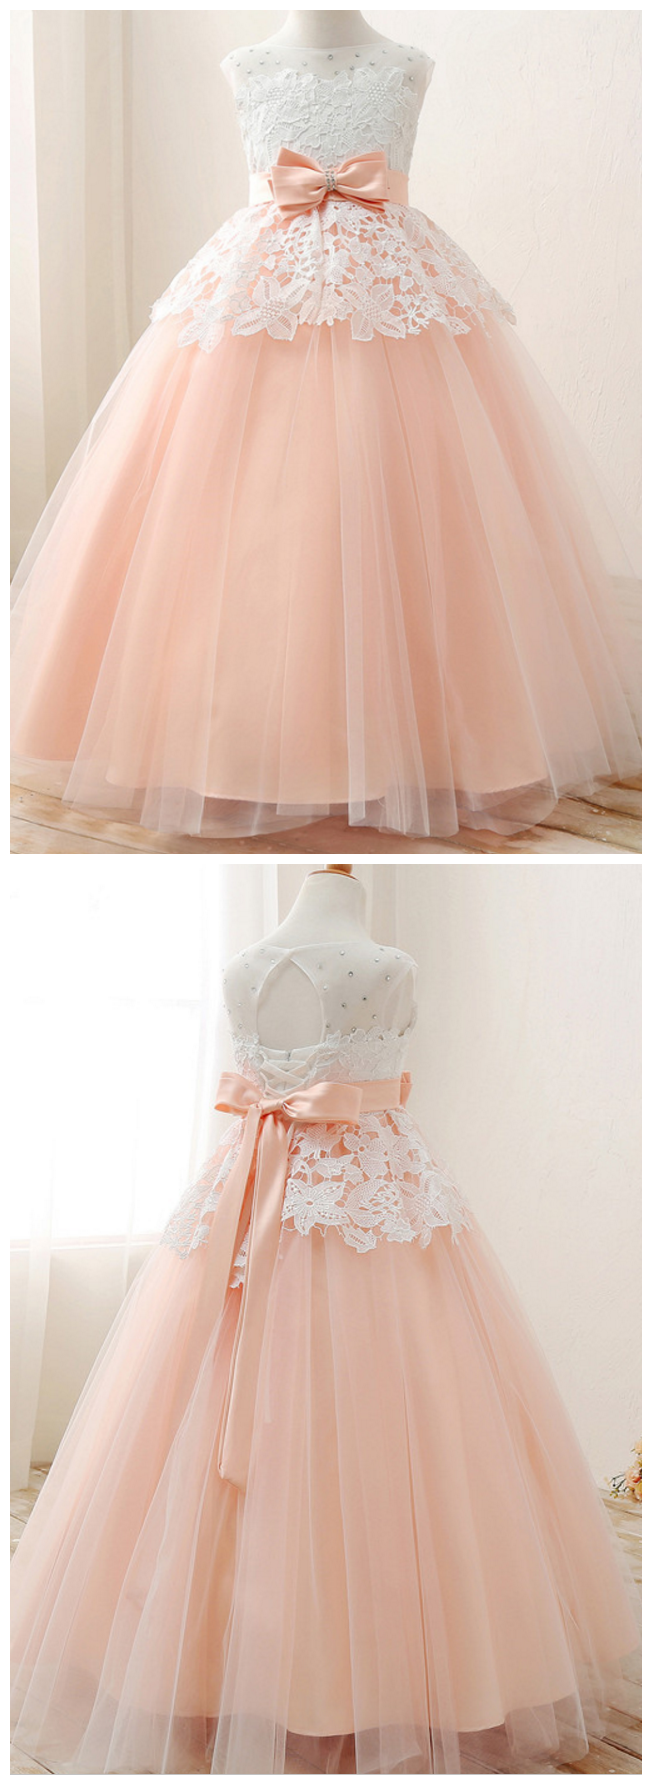 Pink And White Lace Tulle Flower Girl Dress With Bow Belt